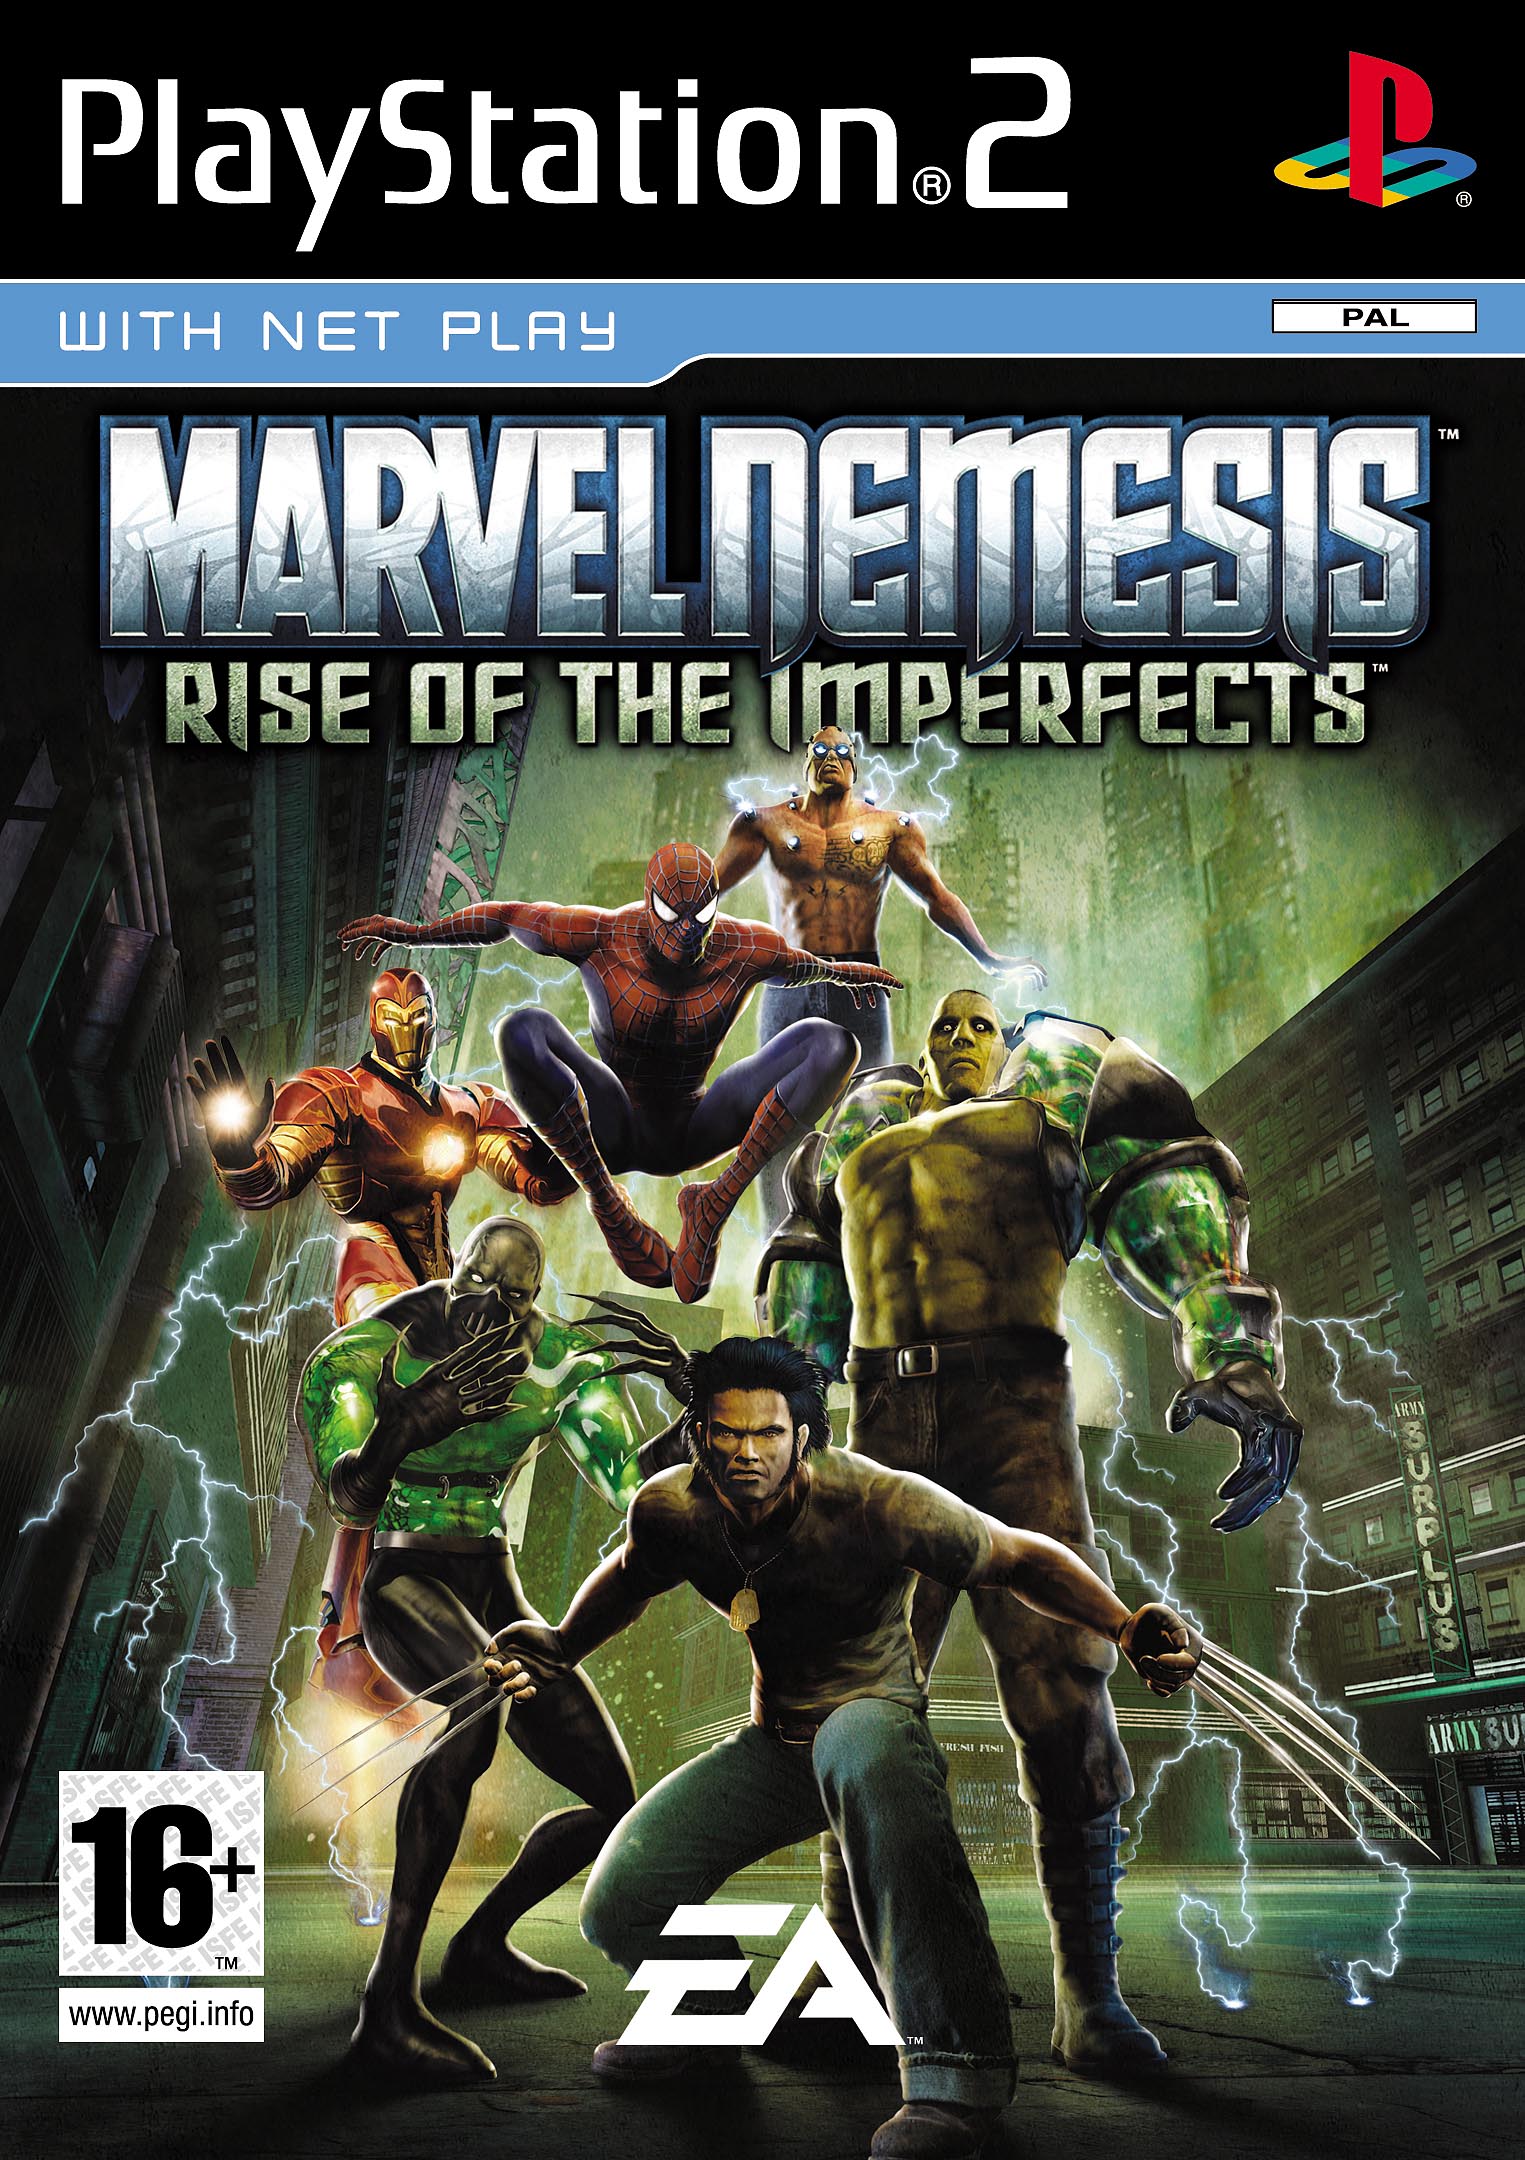 Marvel Nemesis: Rise of the Imperfects. 